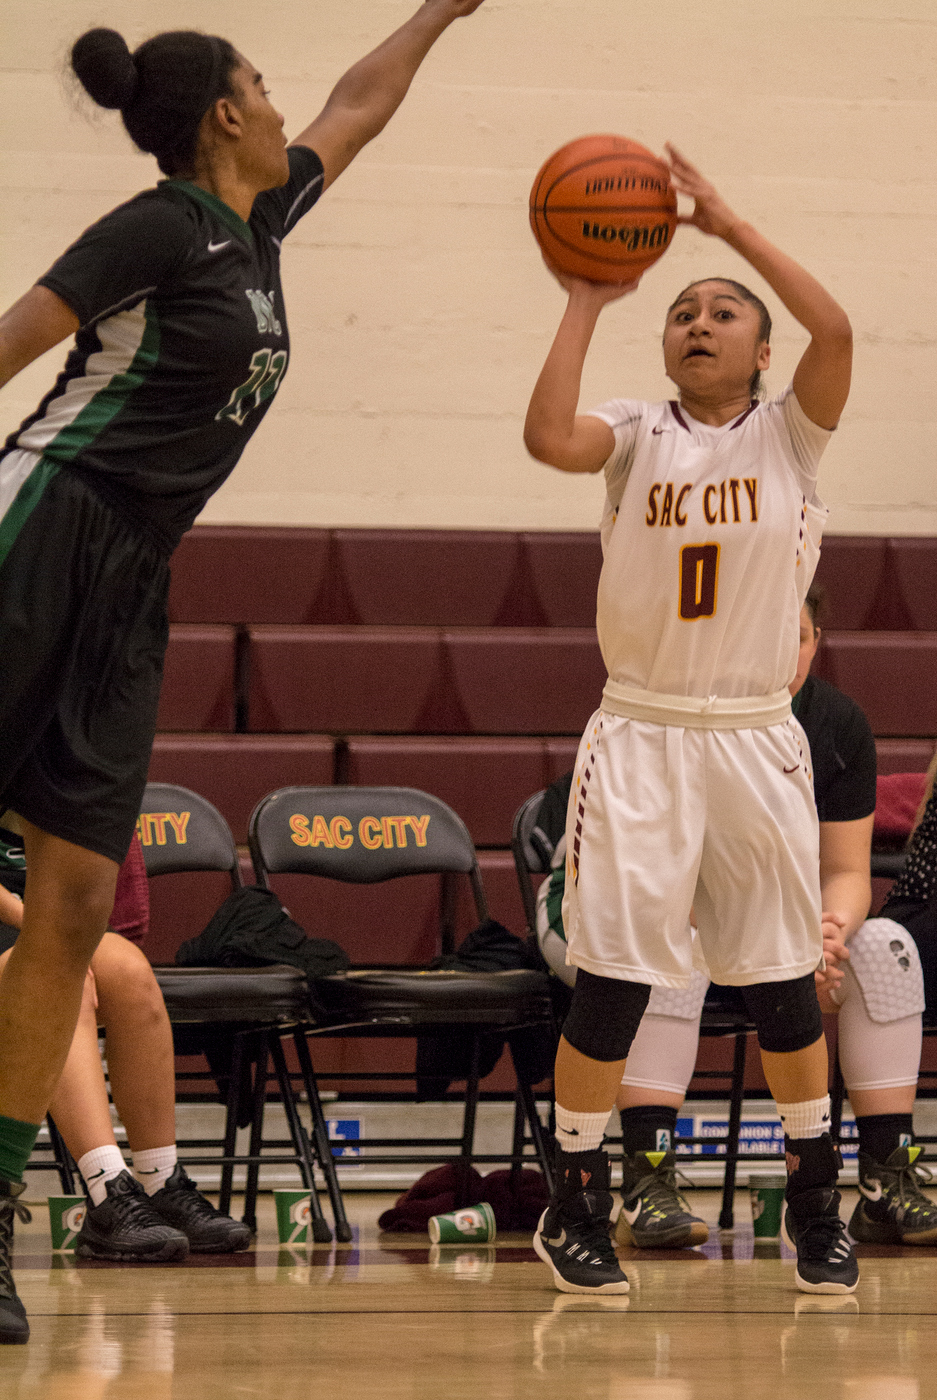 City College guard Corina Tacardon shoots a 3-pointer during the game against Diablo Valley College on Feb. 11, 2016. (Photo Courtesy: Kris Hooks | khooks3825@gmail.com)